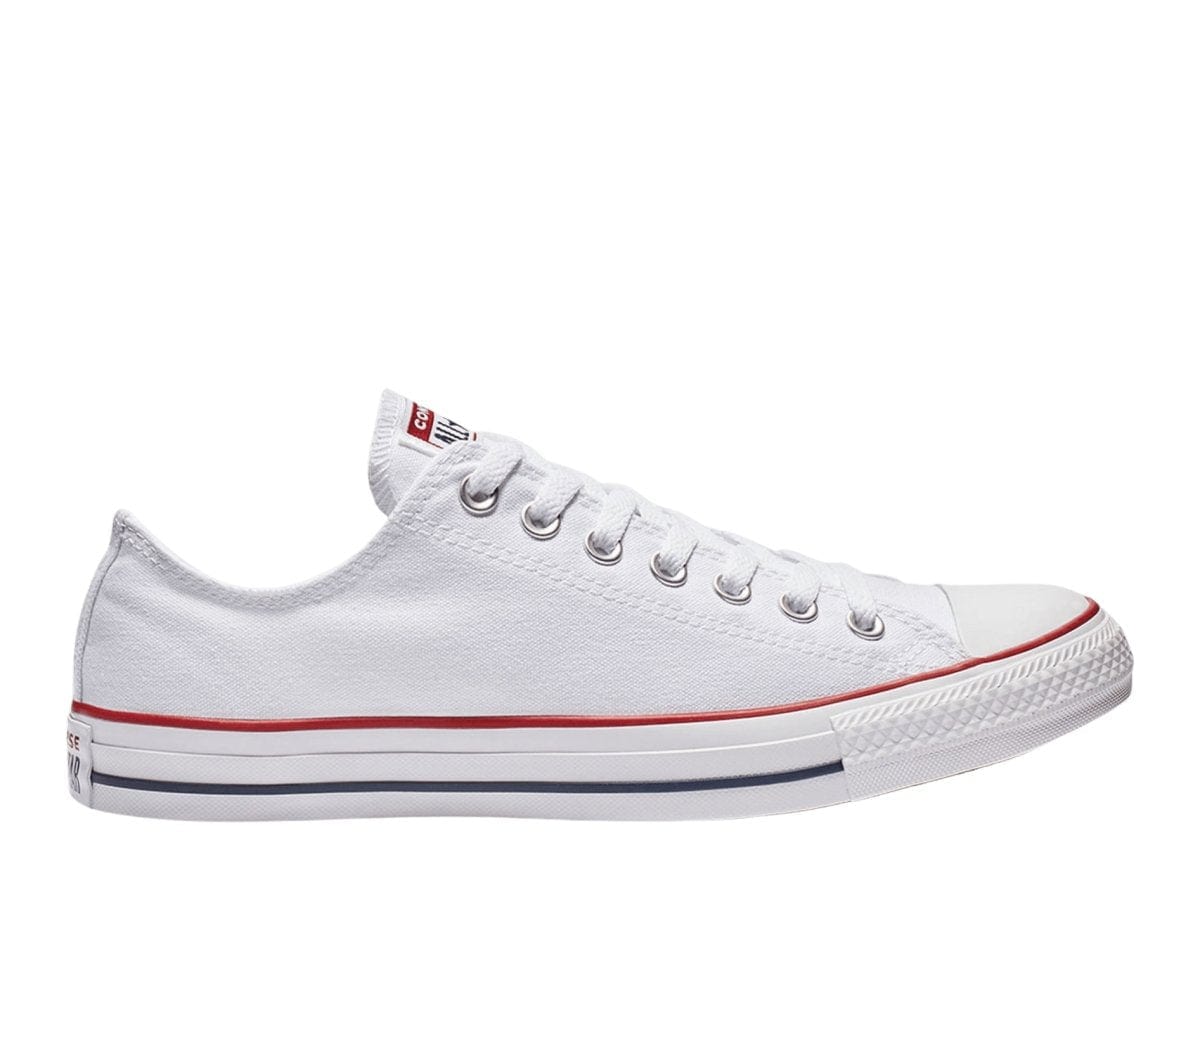 Distraktion Udvej teenagere CONVERSE MEN'S CHUCK TAYLOR ALL STAR LOW TOP WHITE SHOE – INSPORT